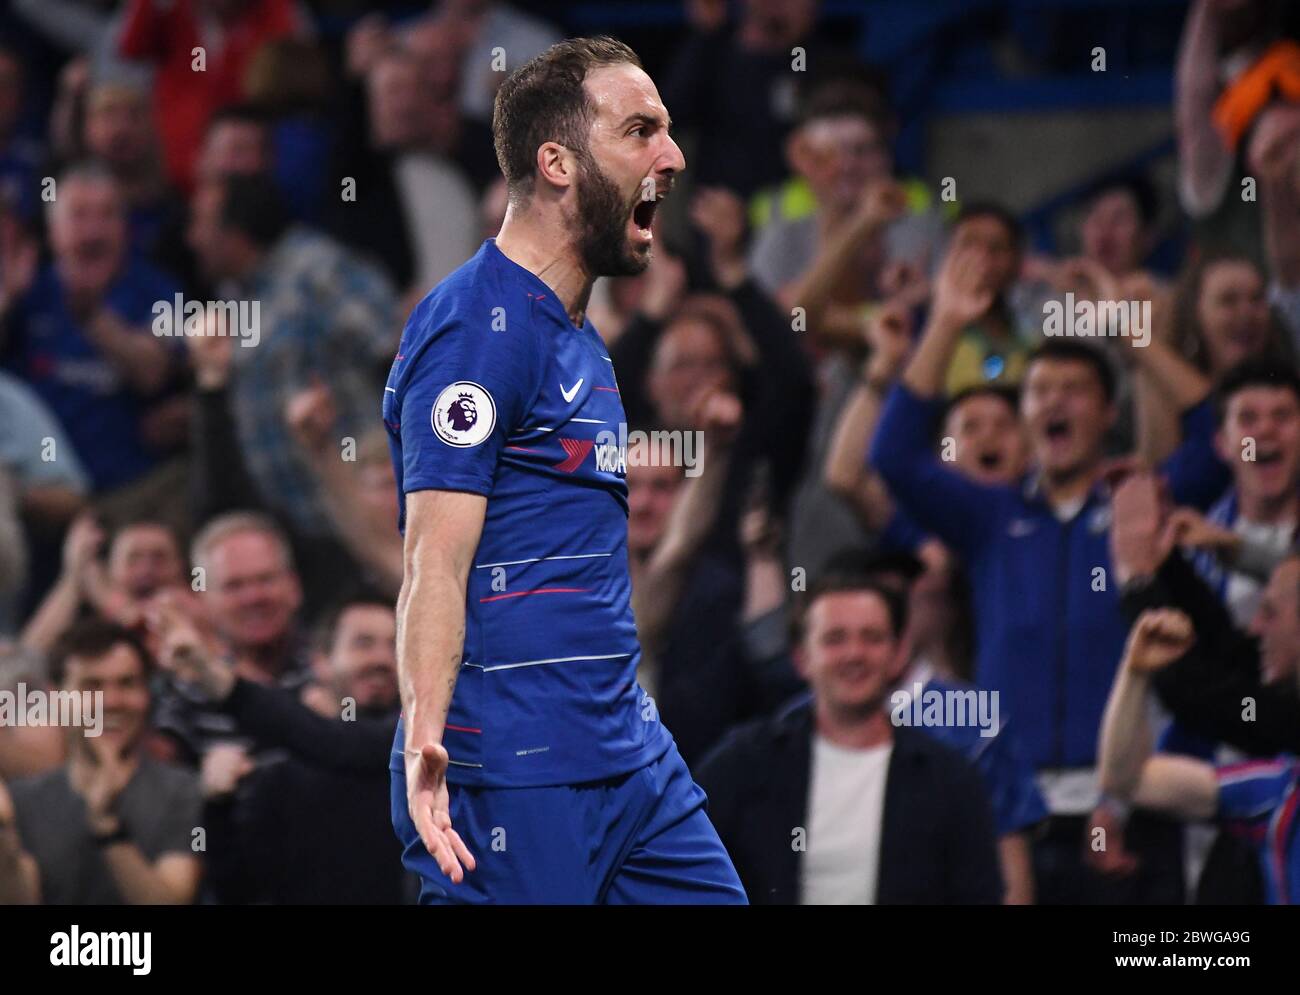 LONDON, ENGLAND - APRIL 22, 2019: Gonzalo Higuain of Chelsea celebrates after he scored a goal during the 2018/19 Premier League game between Chelsea FC and Burnley FC at Stamford Bridge. Stock Photo